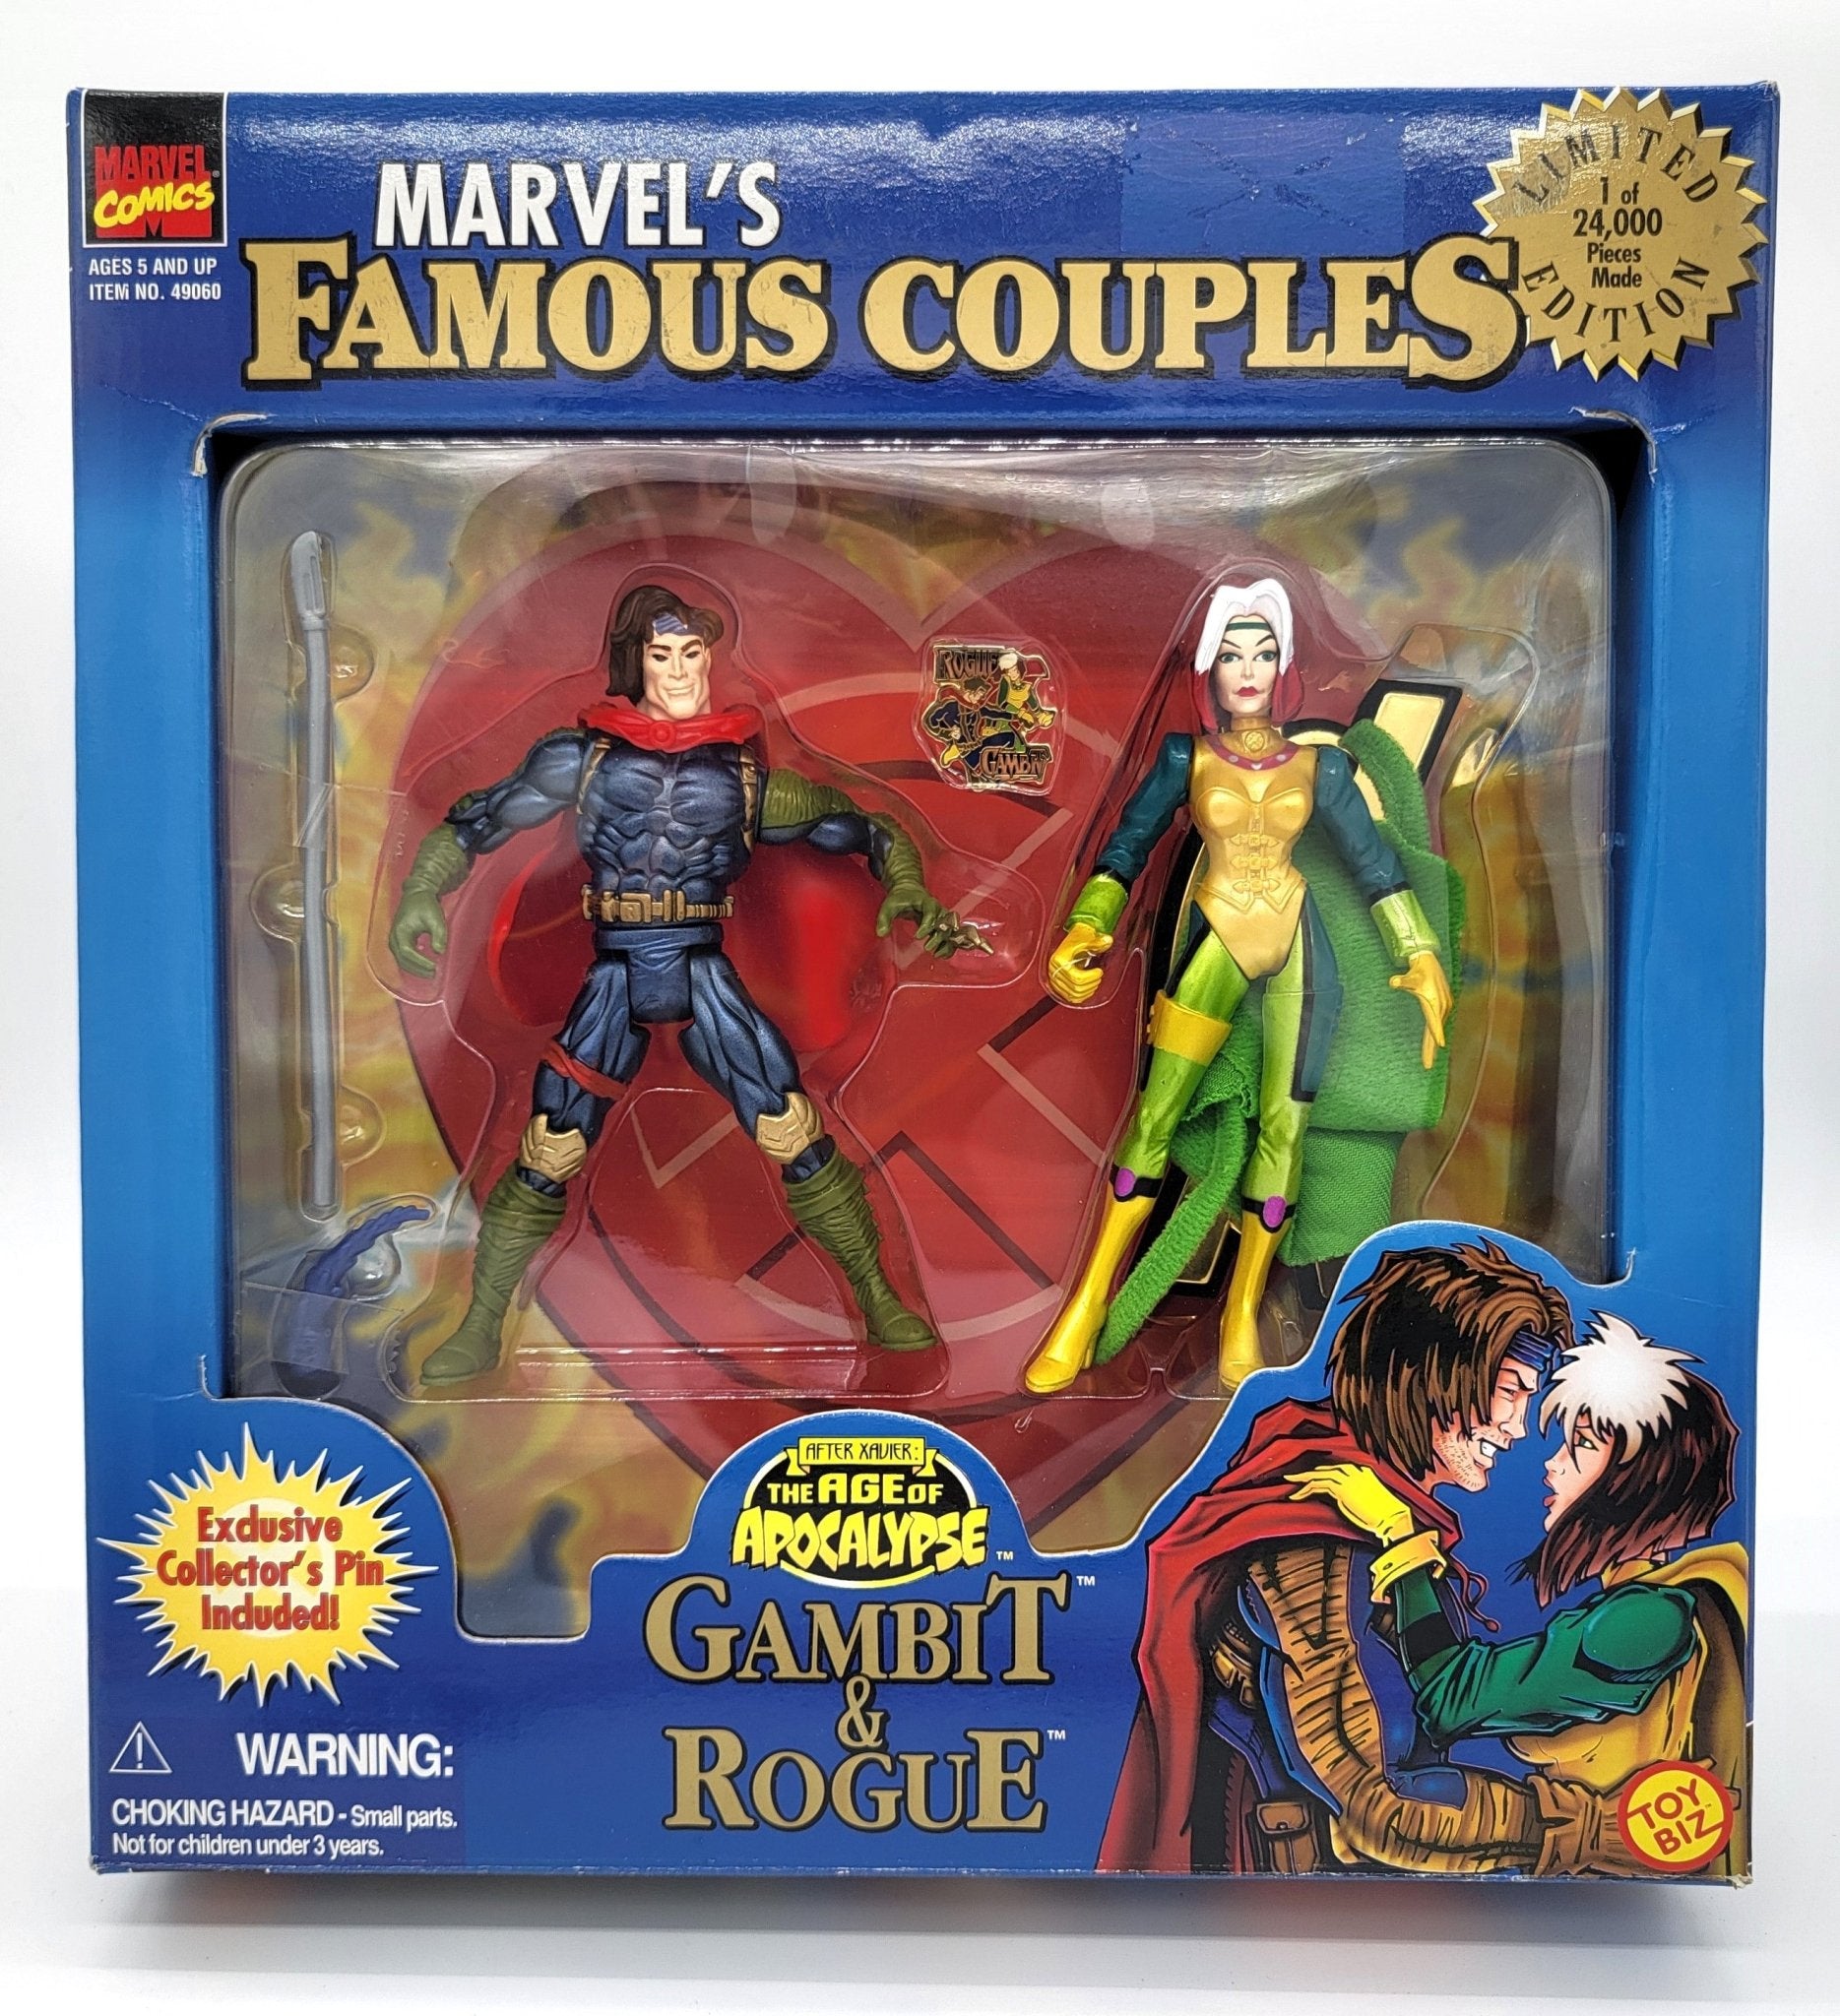 Toy Biz - Toy Biz | Marvel's Famous Couples - Gambit & Rogue - The Age of Apocalypse 1997 | Limited Edition | Vintage Action Figure - Action Figures - Steady Bunny Shop